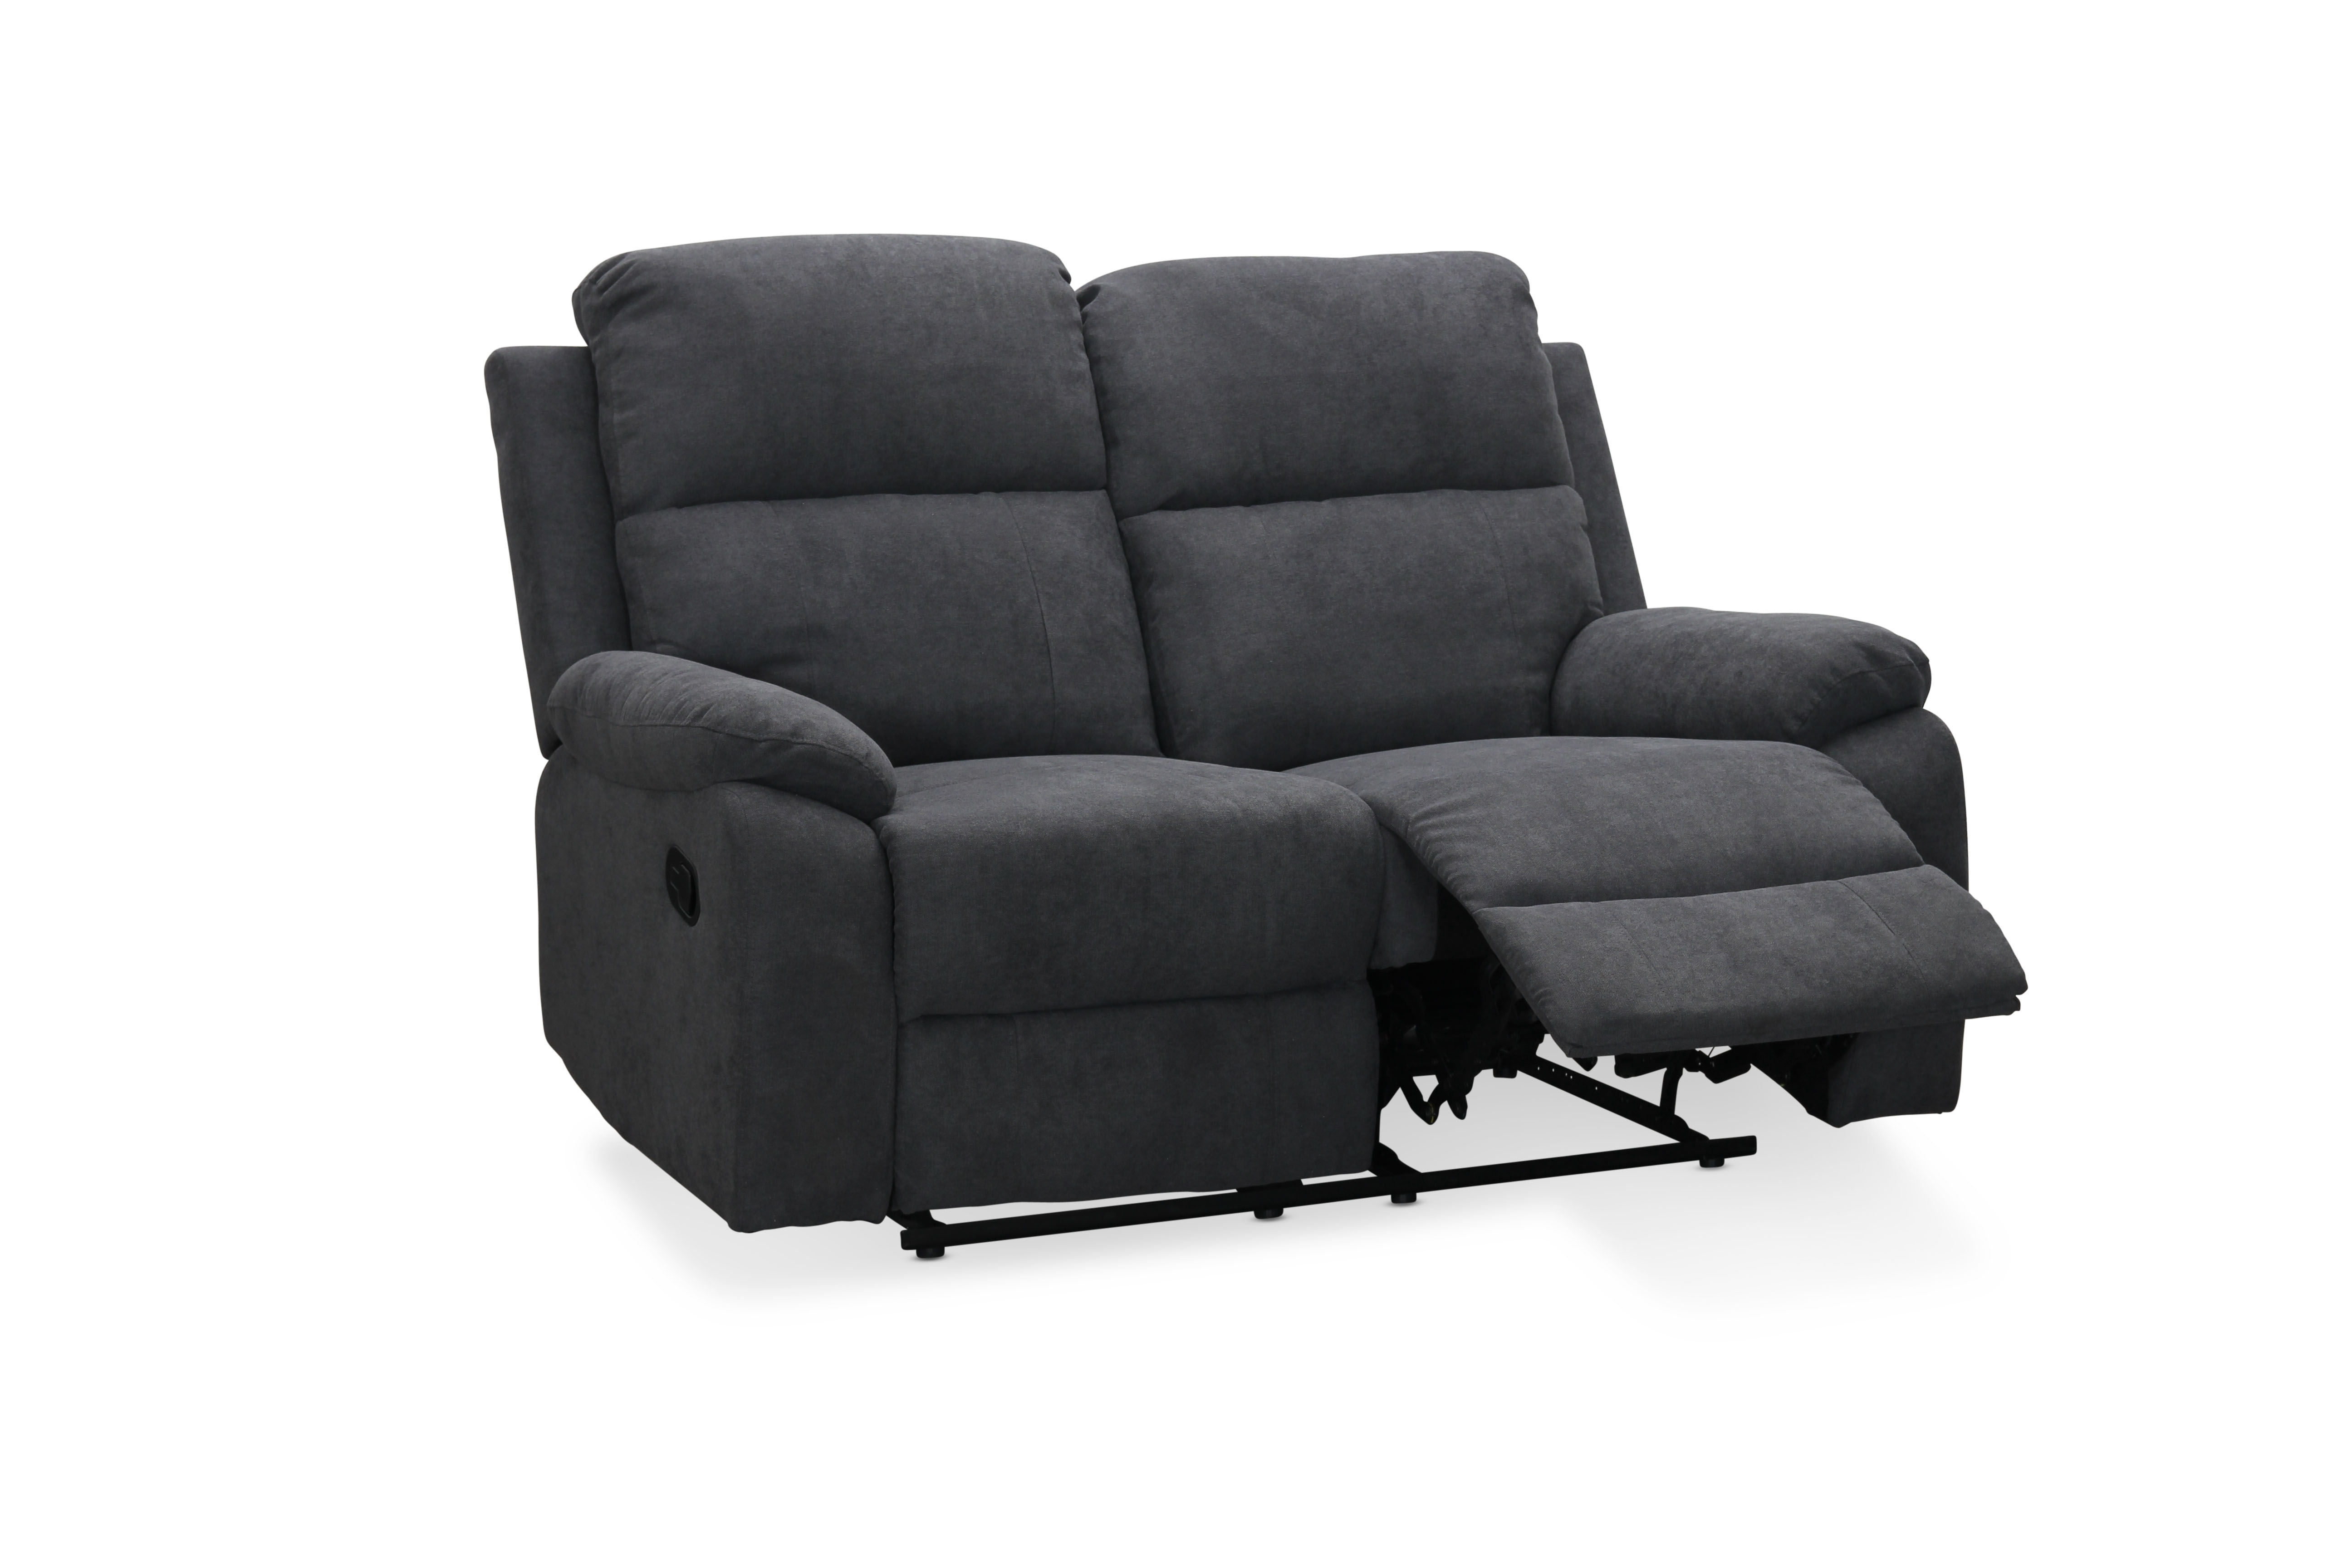 Nevada Recliner 2-sits i gruppen Soffor / Reclinersoffa hos HolyHome (293220010)